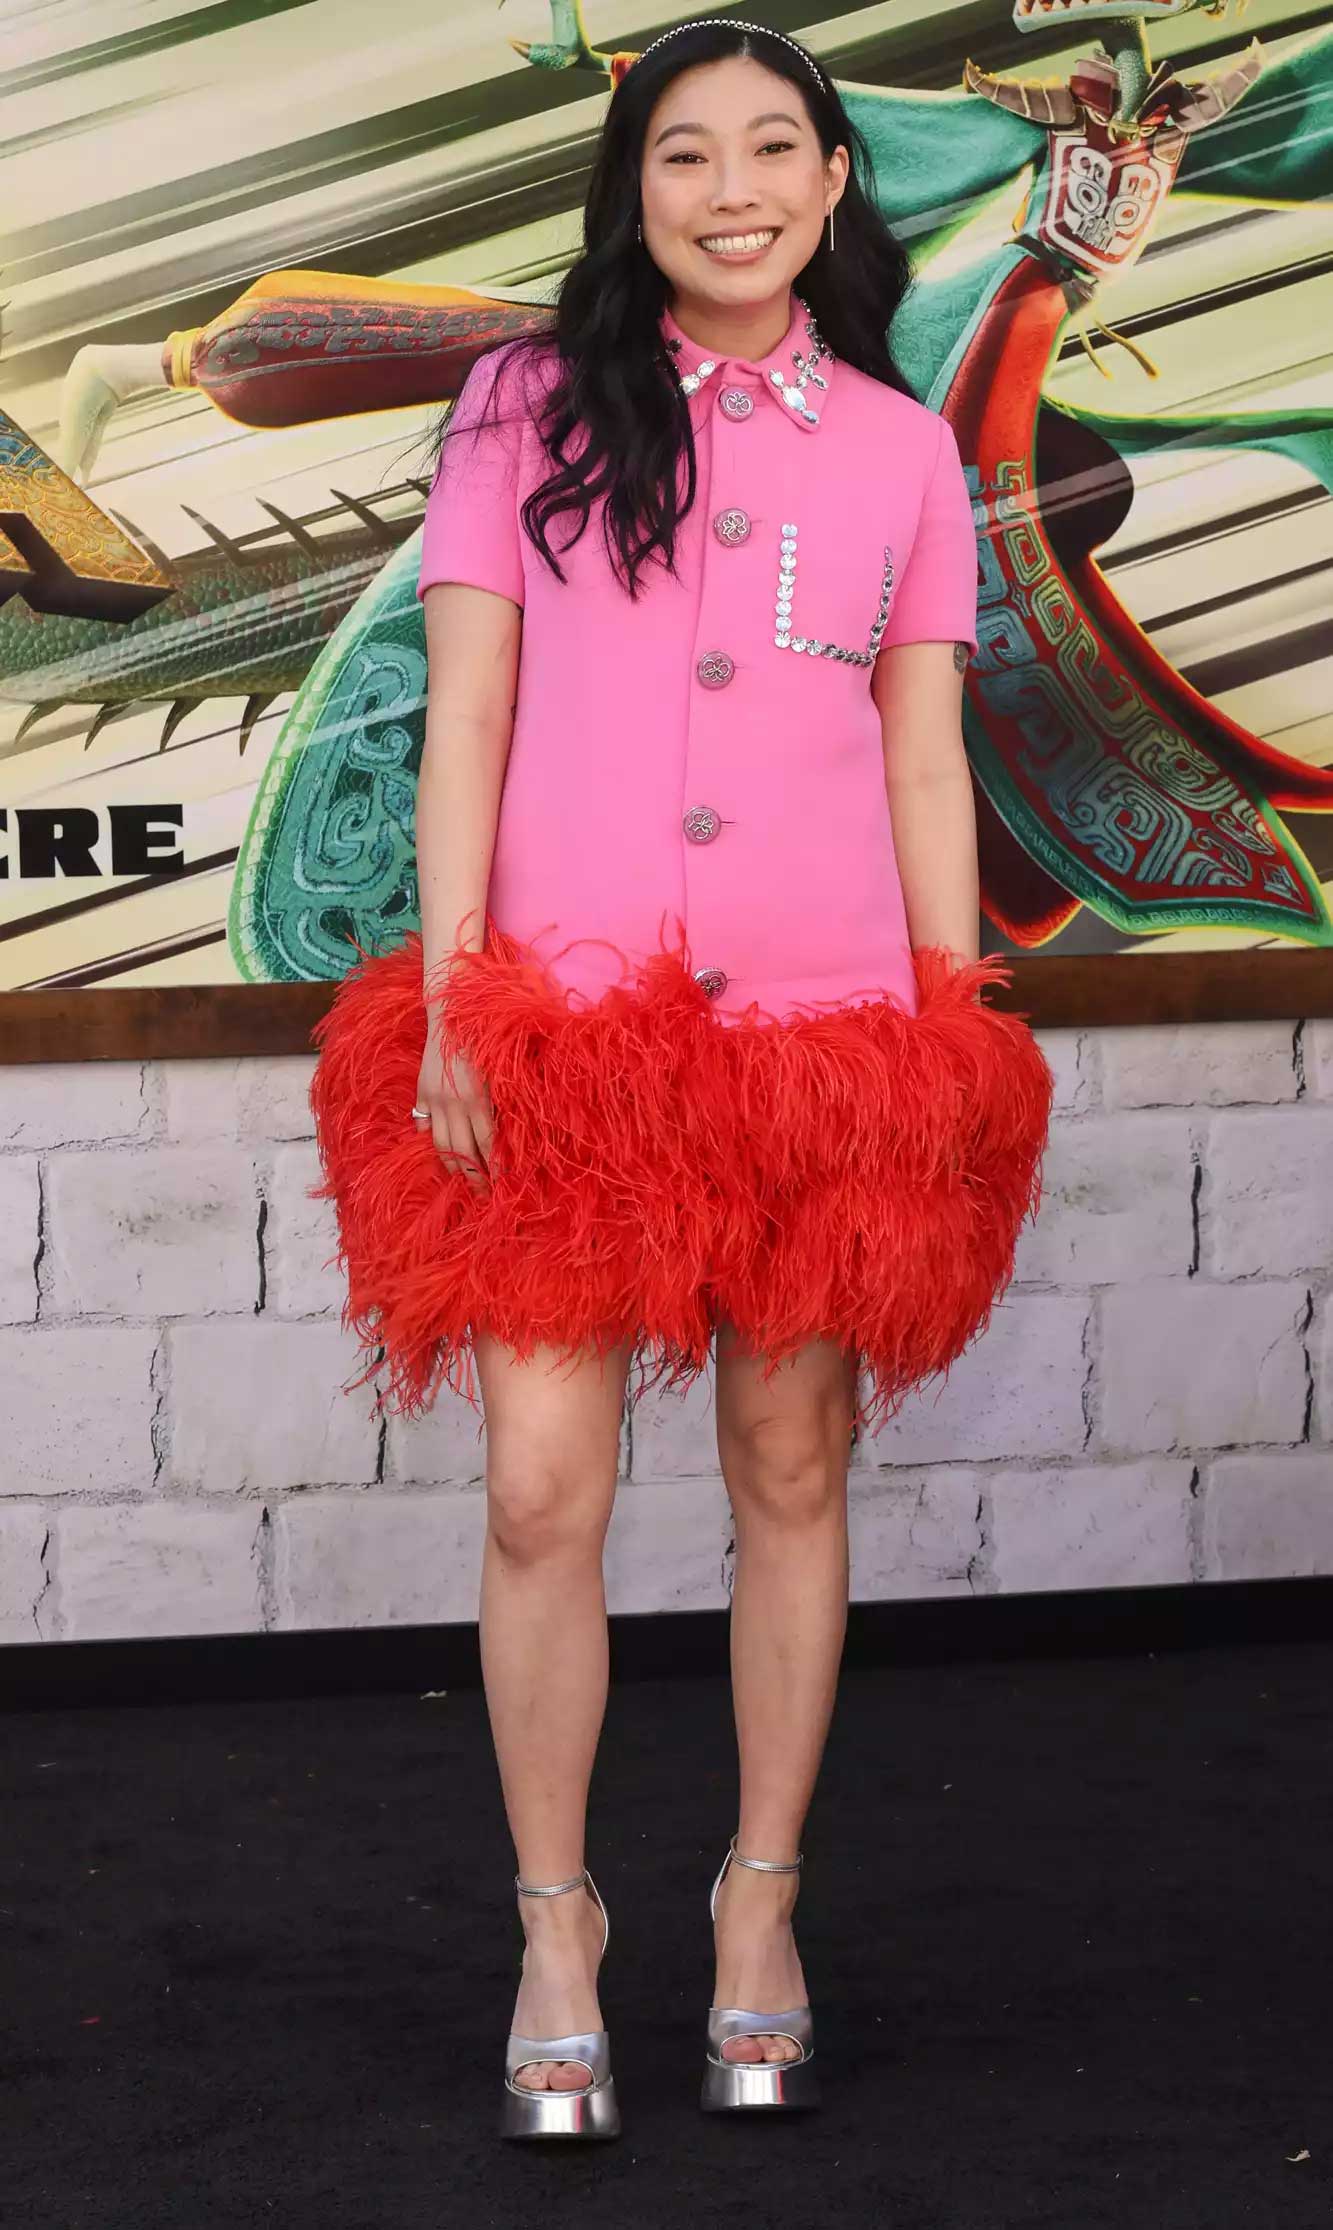 Awkwafina teamed up her bright pink and red dress with silver open toed heels